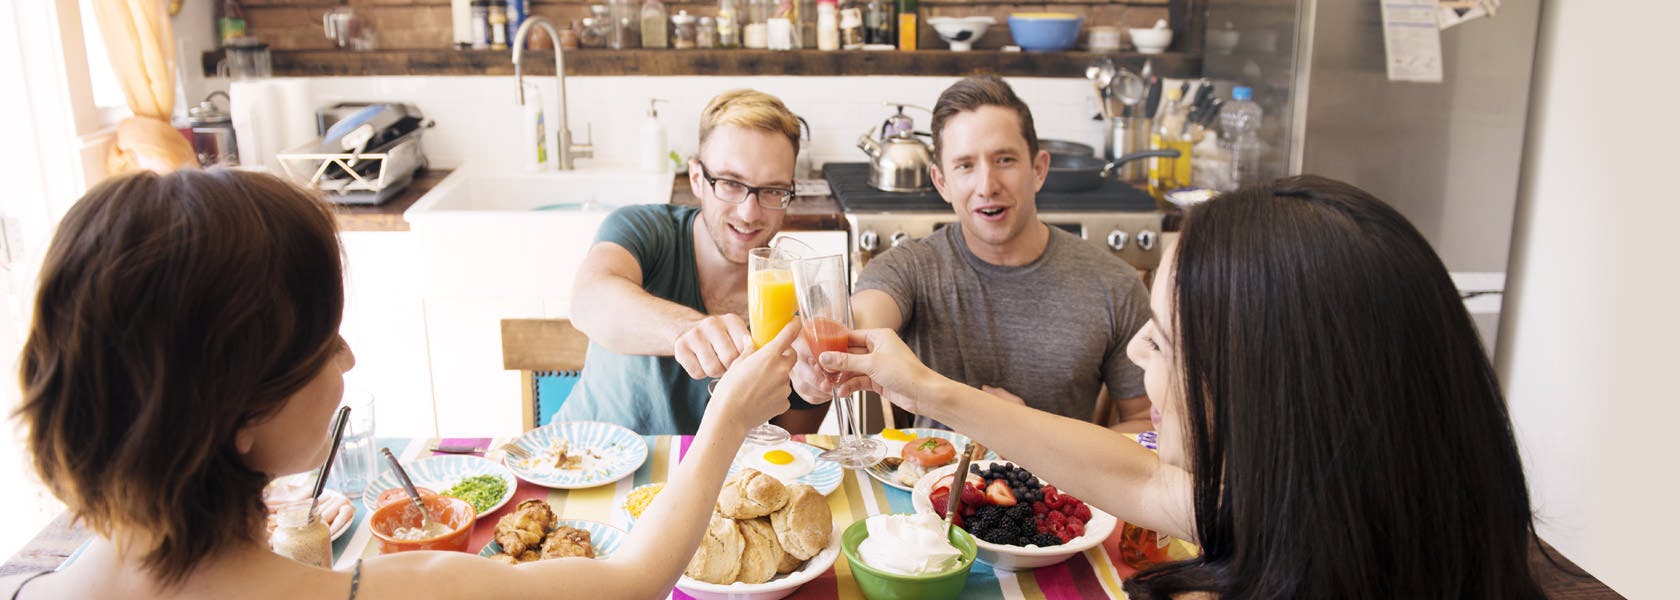 Friends Raise Their Glasses Together In A Toast At Breakfast